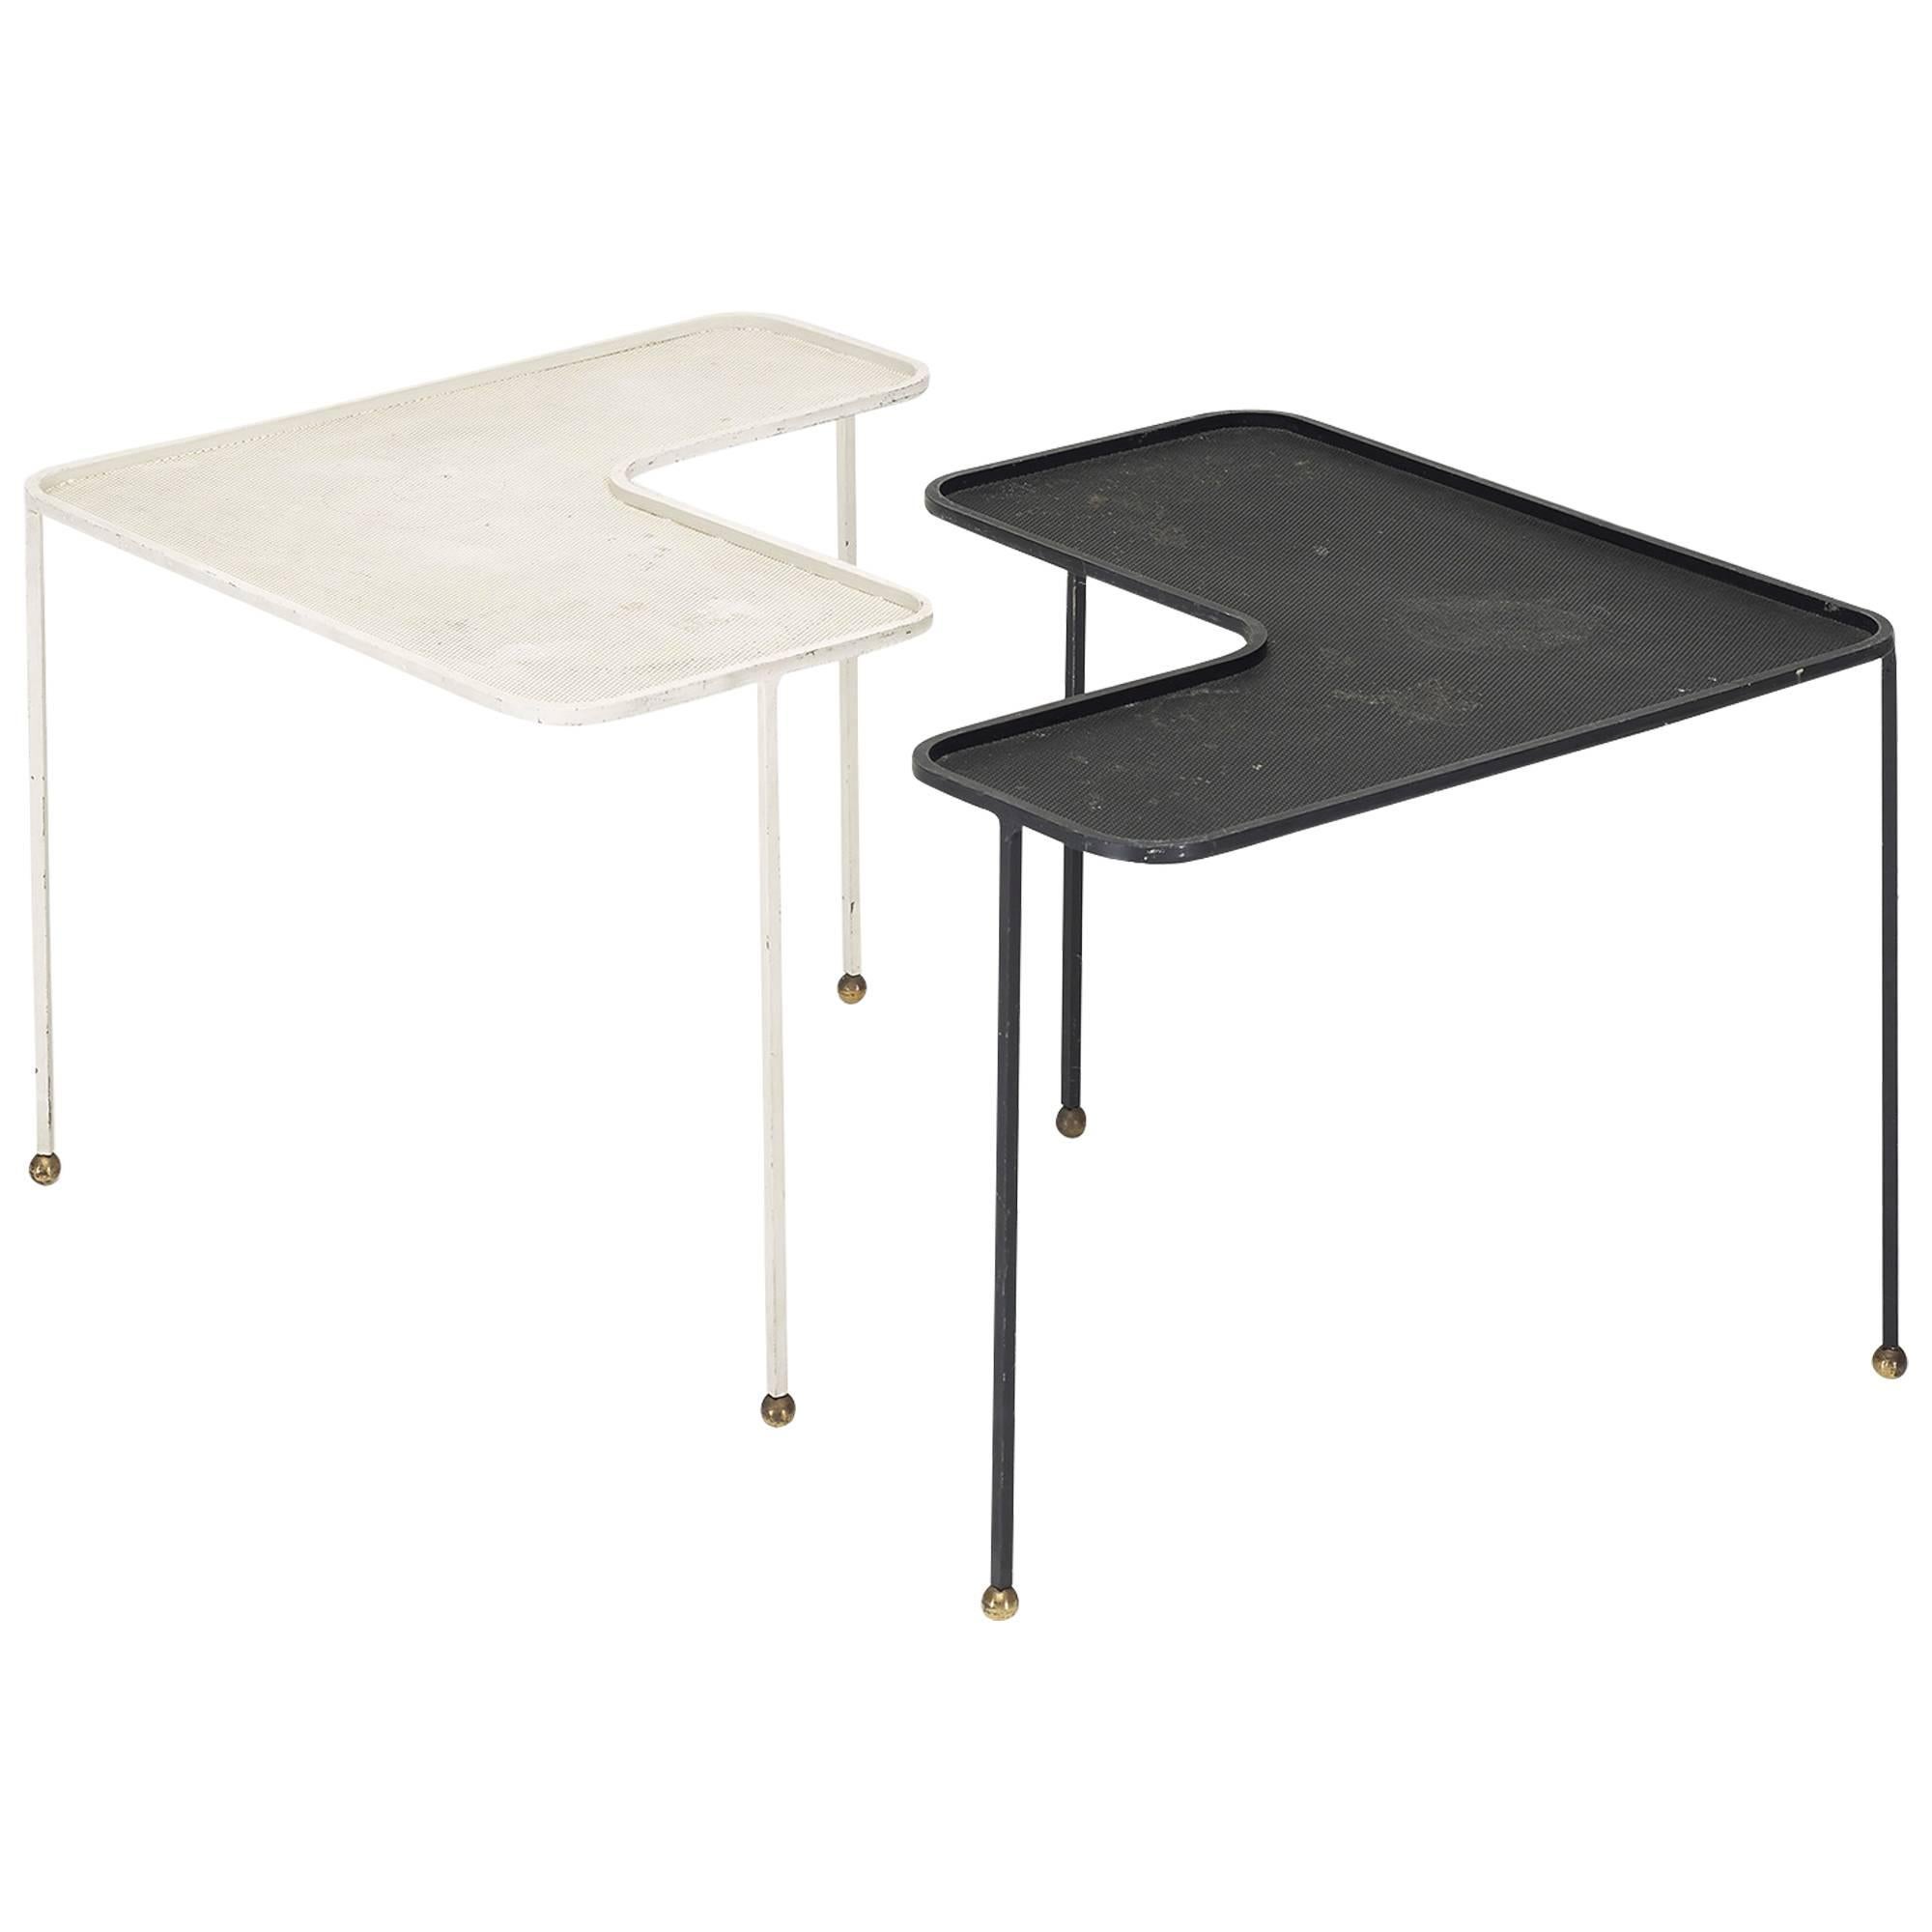 Domino Tables, Pair by Mathieu Matégot for Atelier Matégot